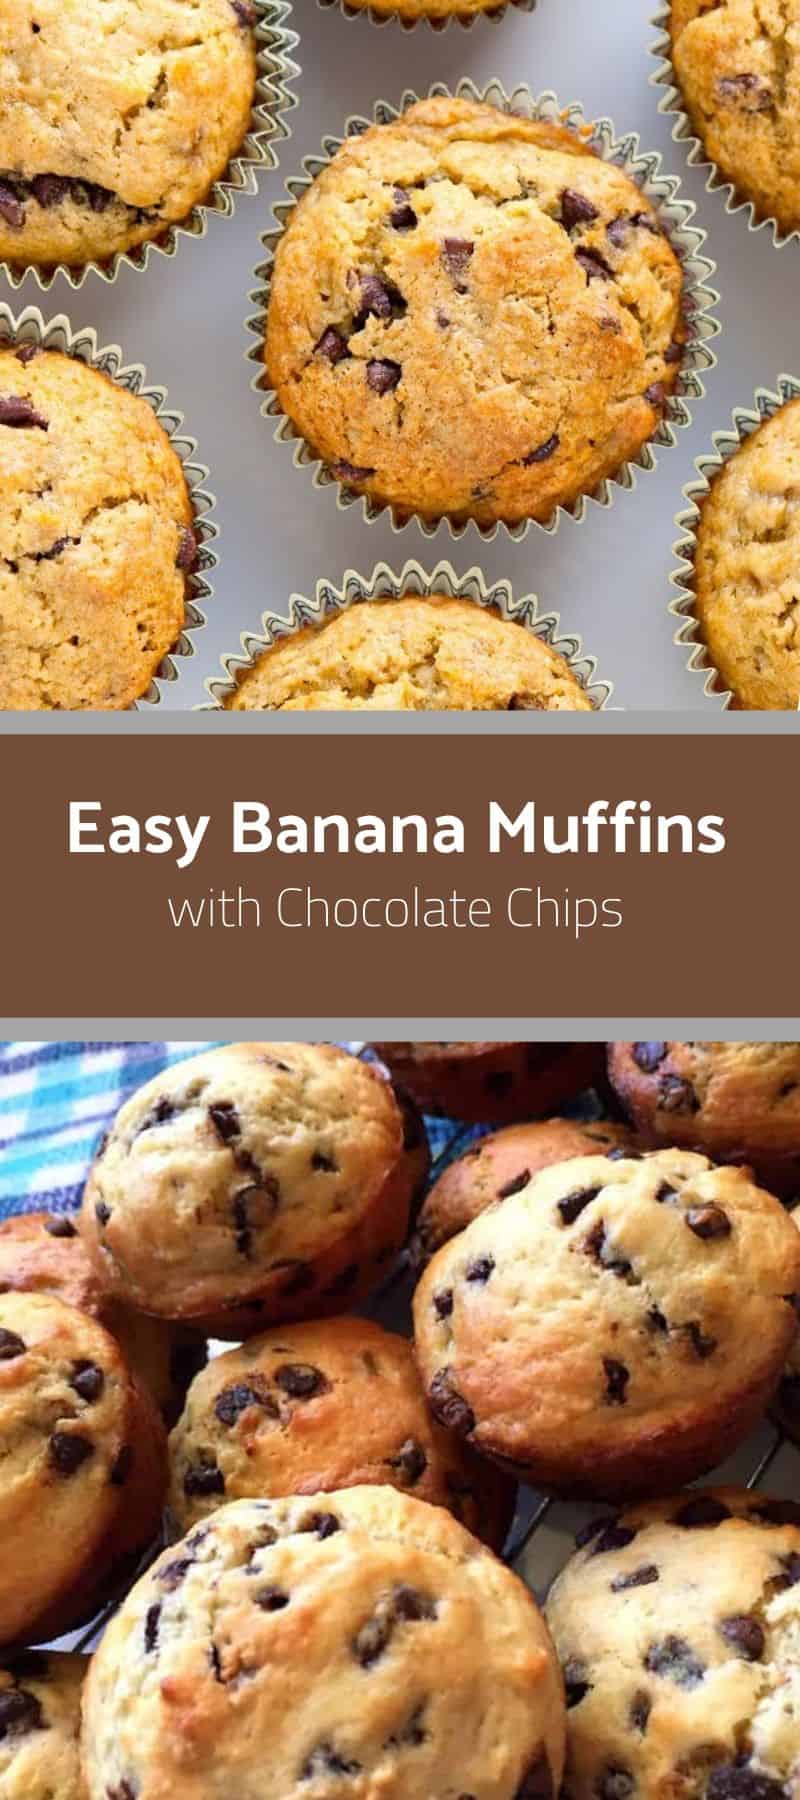 Easy Banana Muffins with Chocolate Chips 3